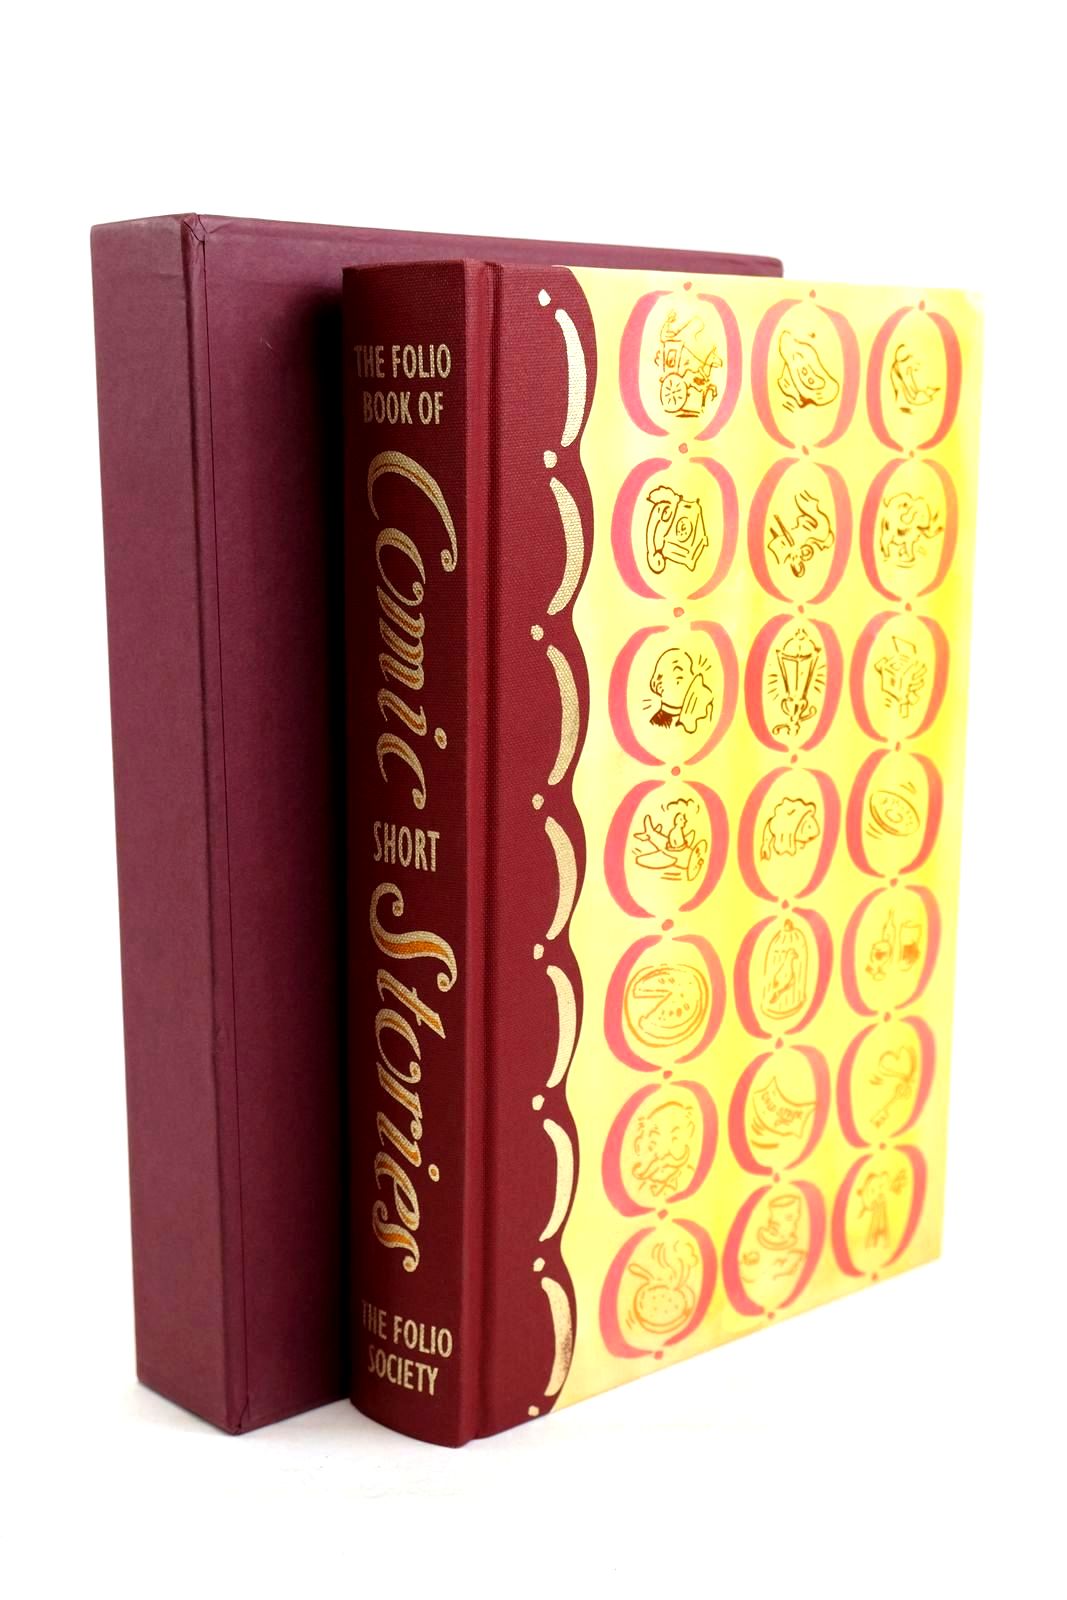 Photo of THE FOLIO BOOK OF COMIC SHORT STORIES written by Hughes, David illustrated by Cox, Paul published by Folio Society (STOCK CODE: 1320373)  for sale by Stella & Rose's Books